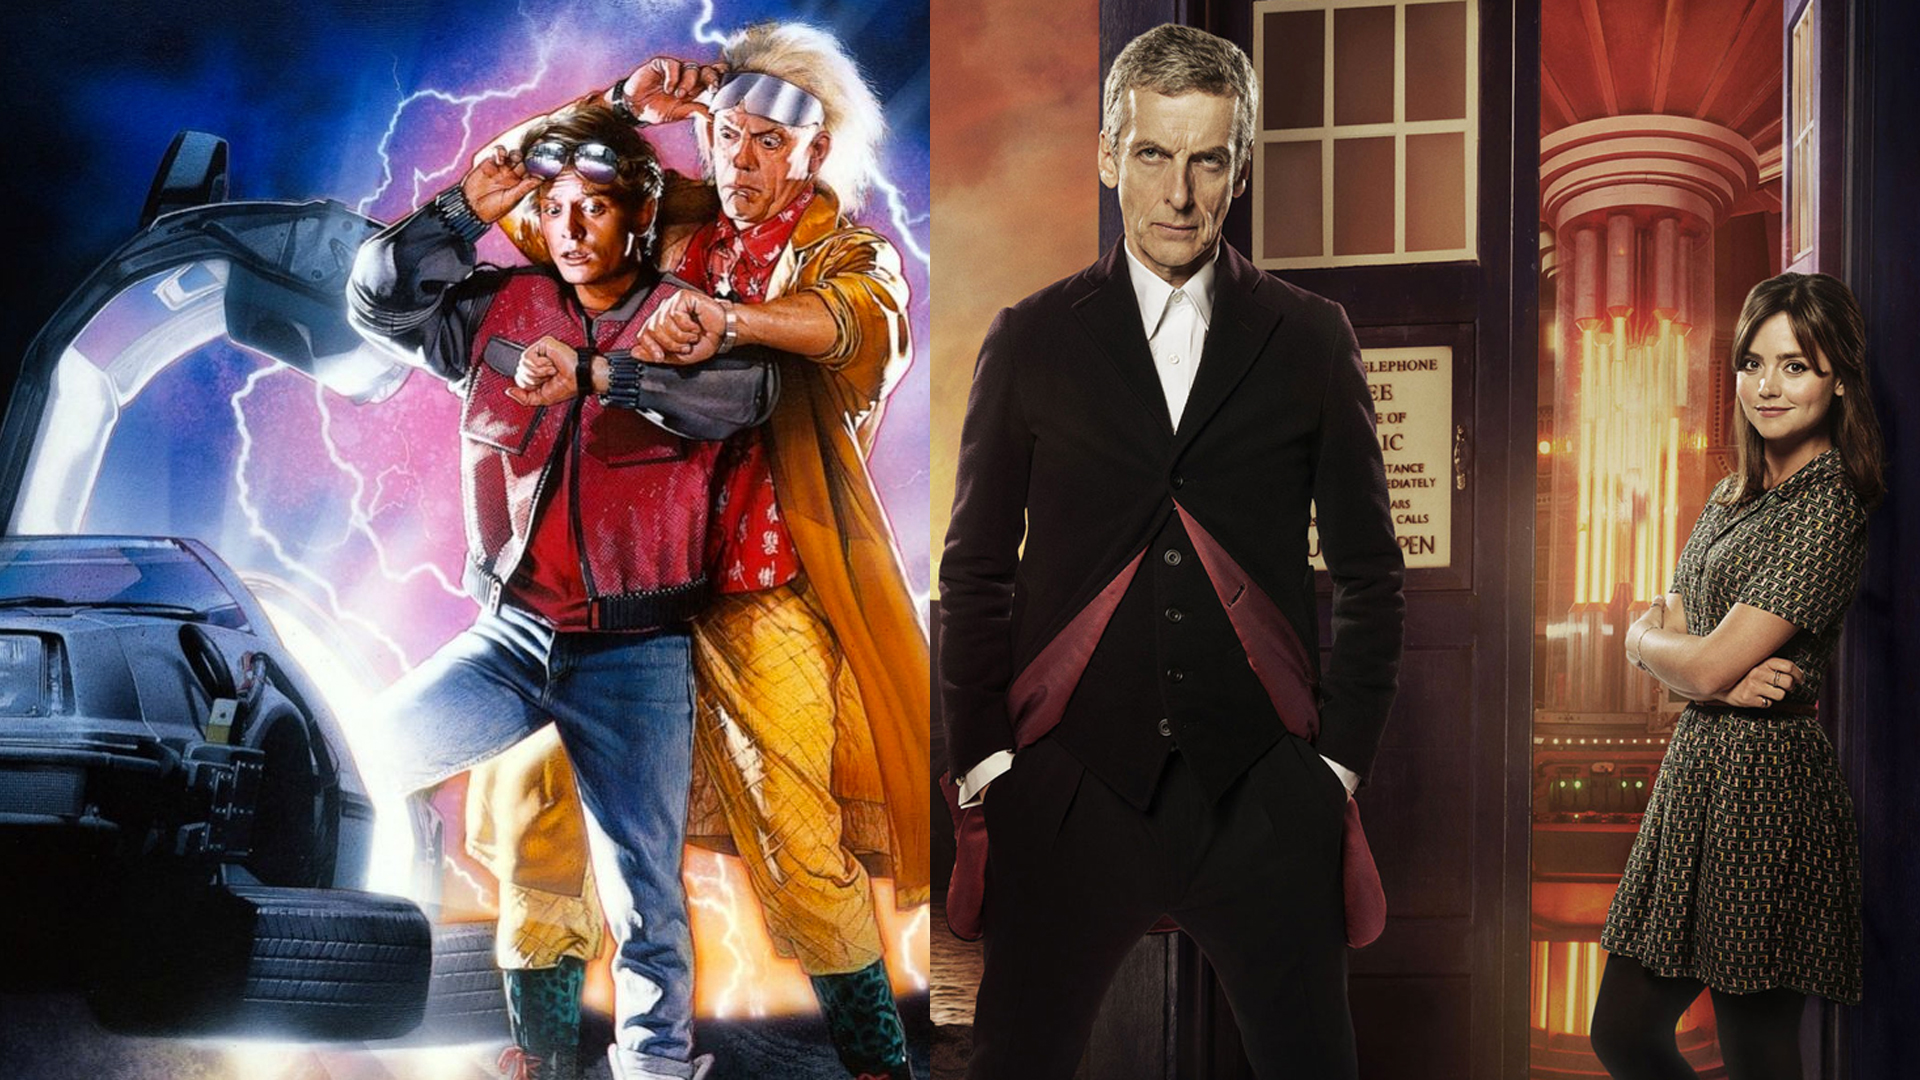 Doctor Who S Day Roundup Back And Forth To The Future Images, Photos, Reviews